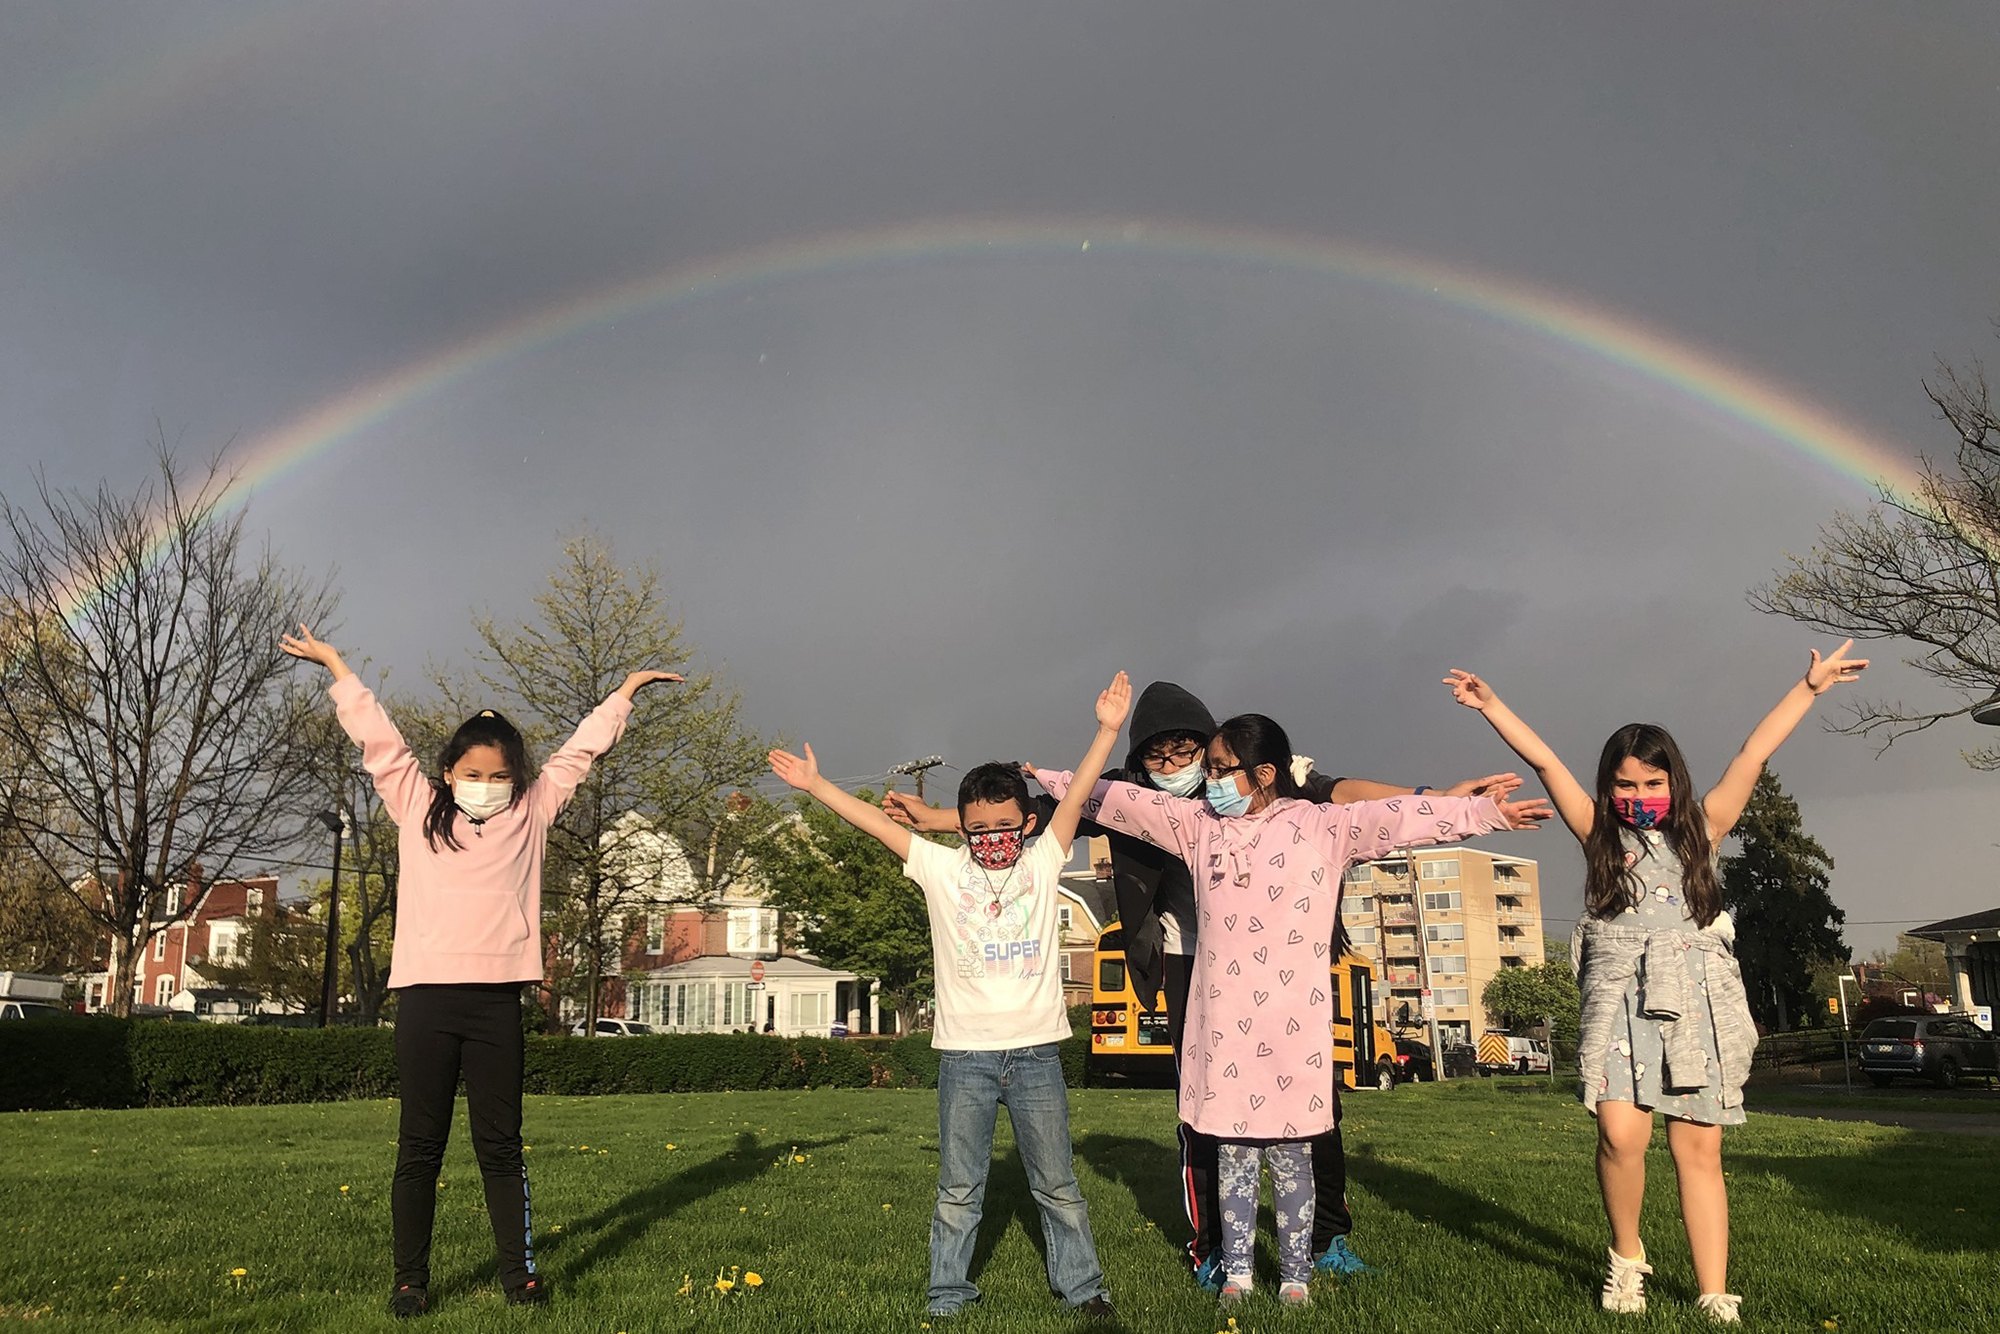 Children raising their hands with a rainbow in the background